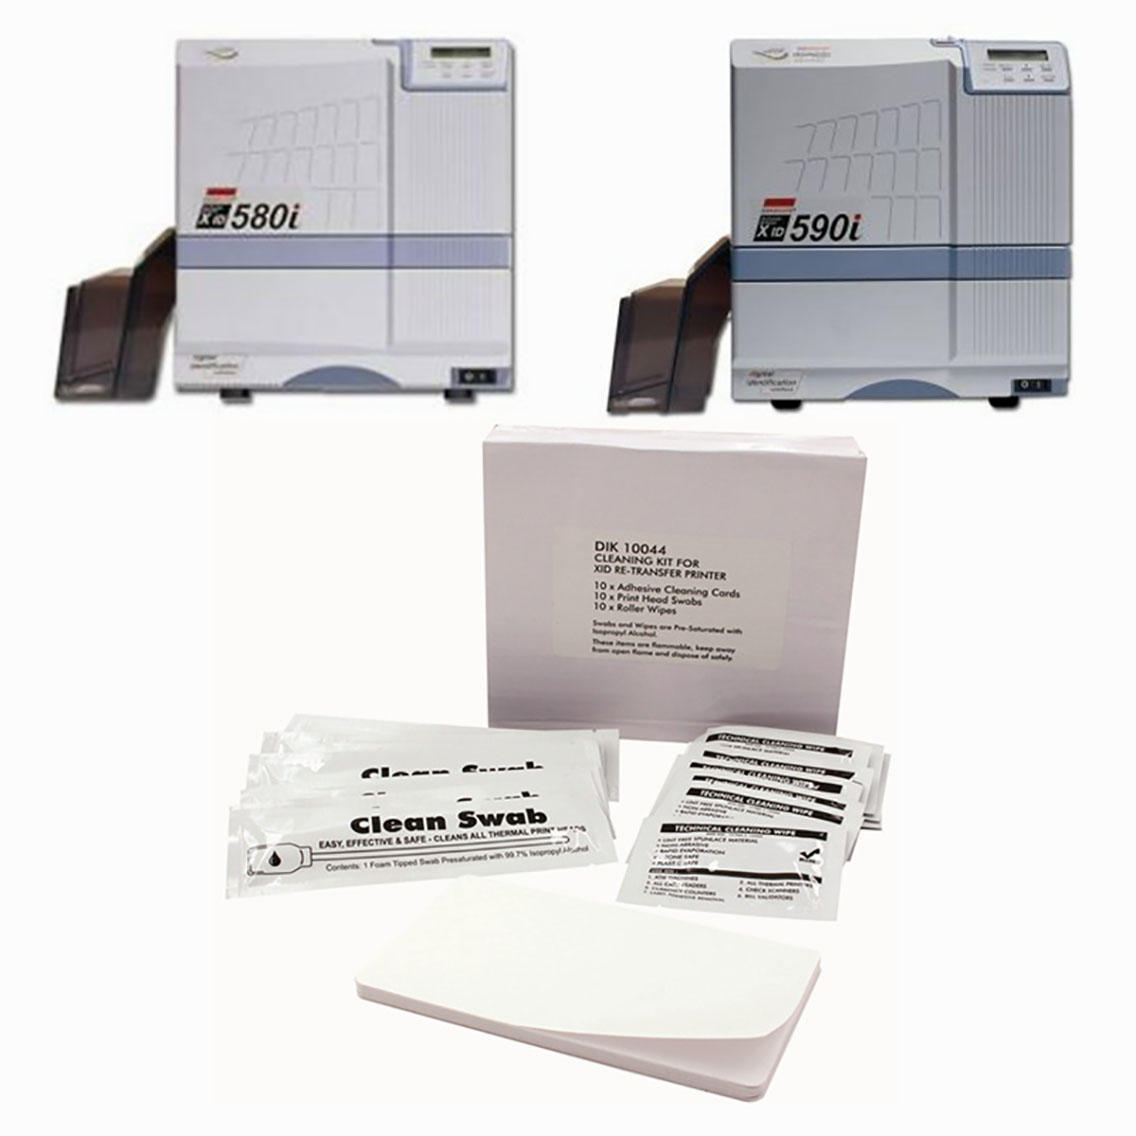 Sponge Matica DRY Cleaning Cards manufacturer for card printer Cleanmo-3